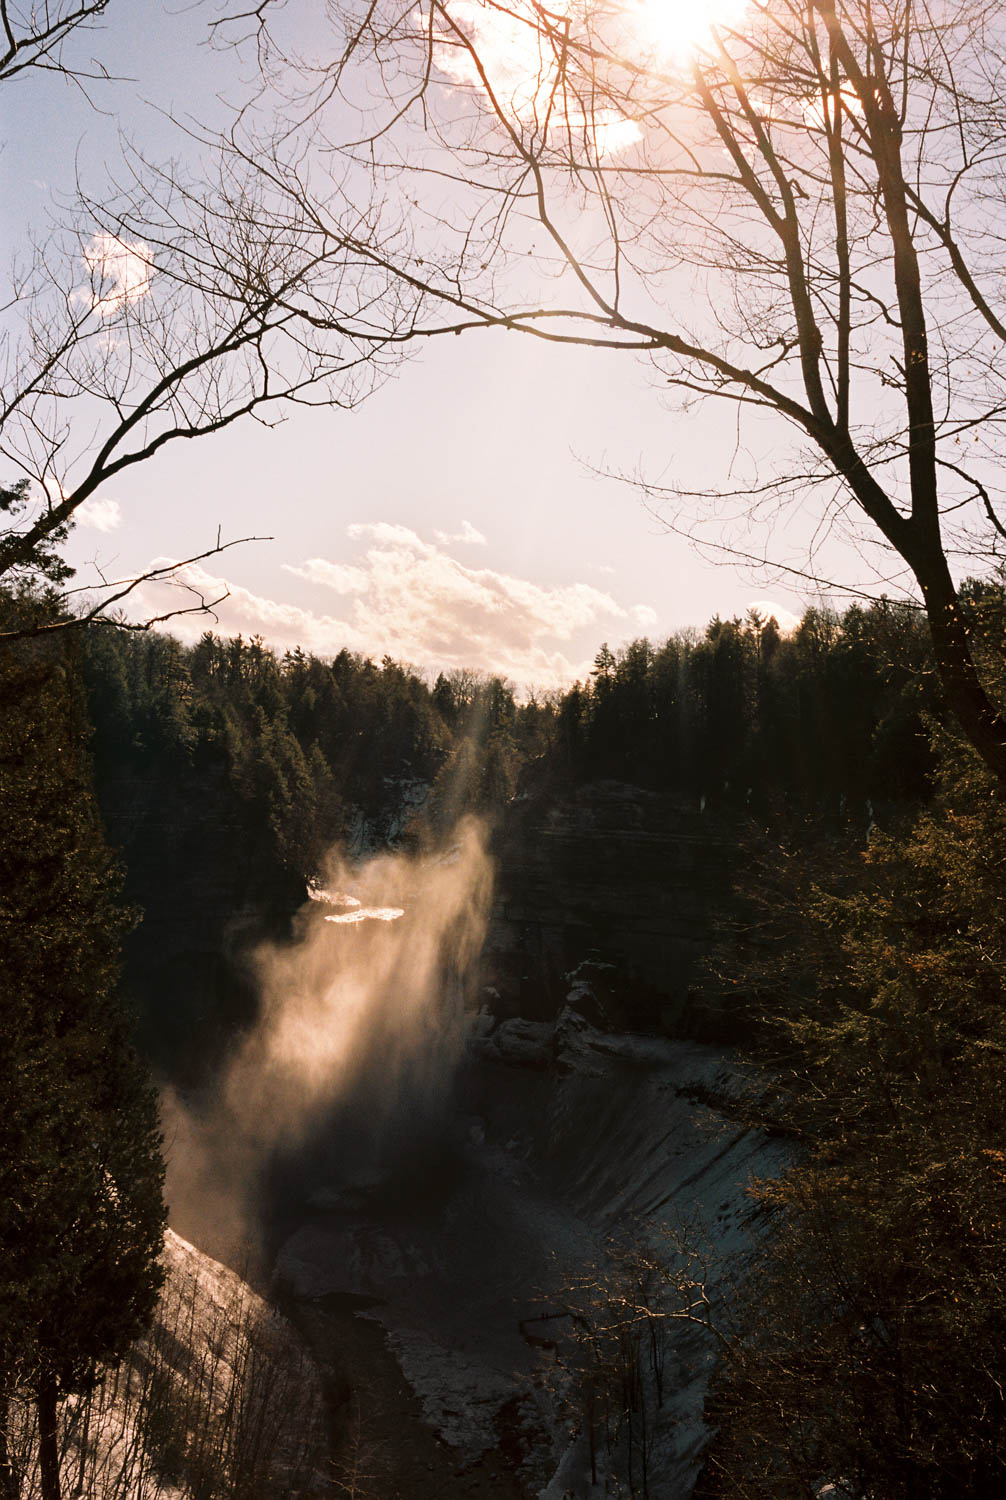 A photograph of Taughannock Falls in Ithaca, NY photographed by a Leica M2 on Kodak Portra 400